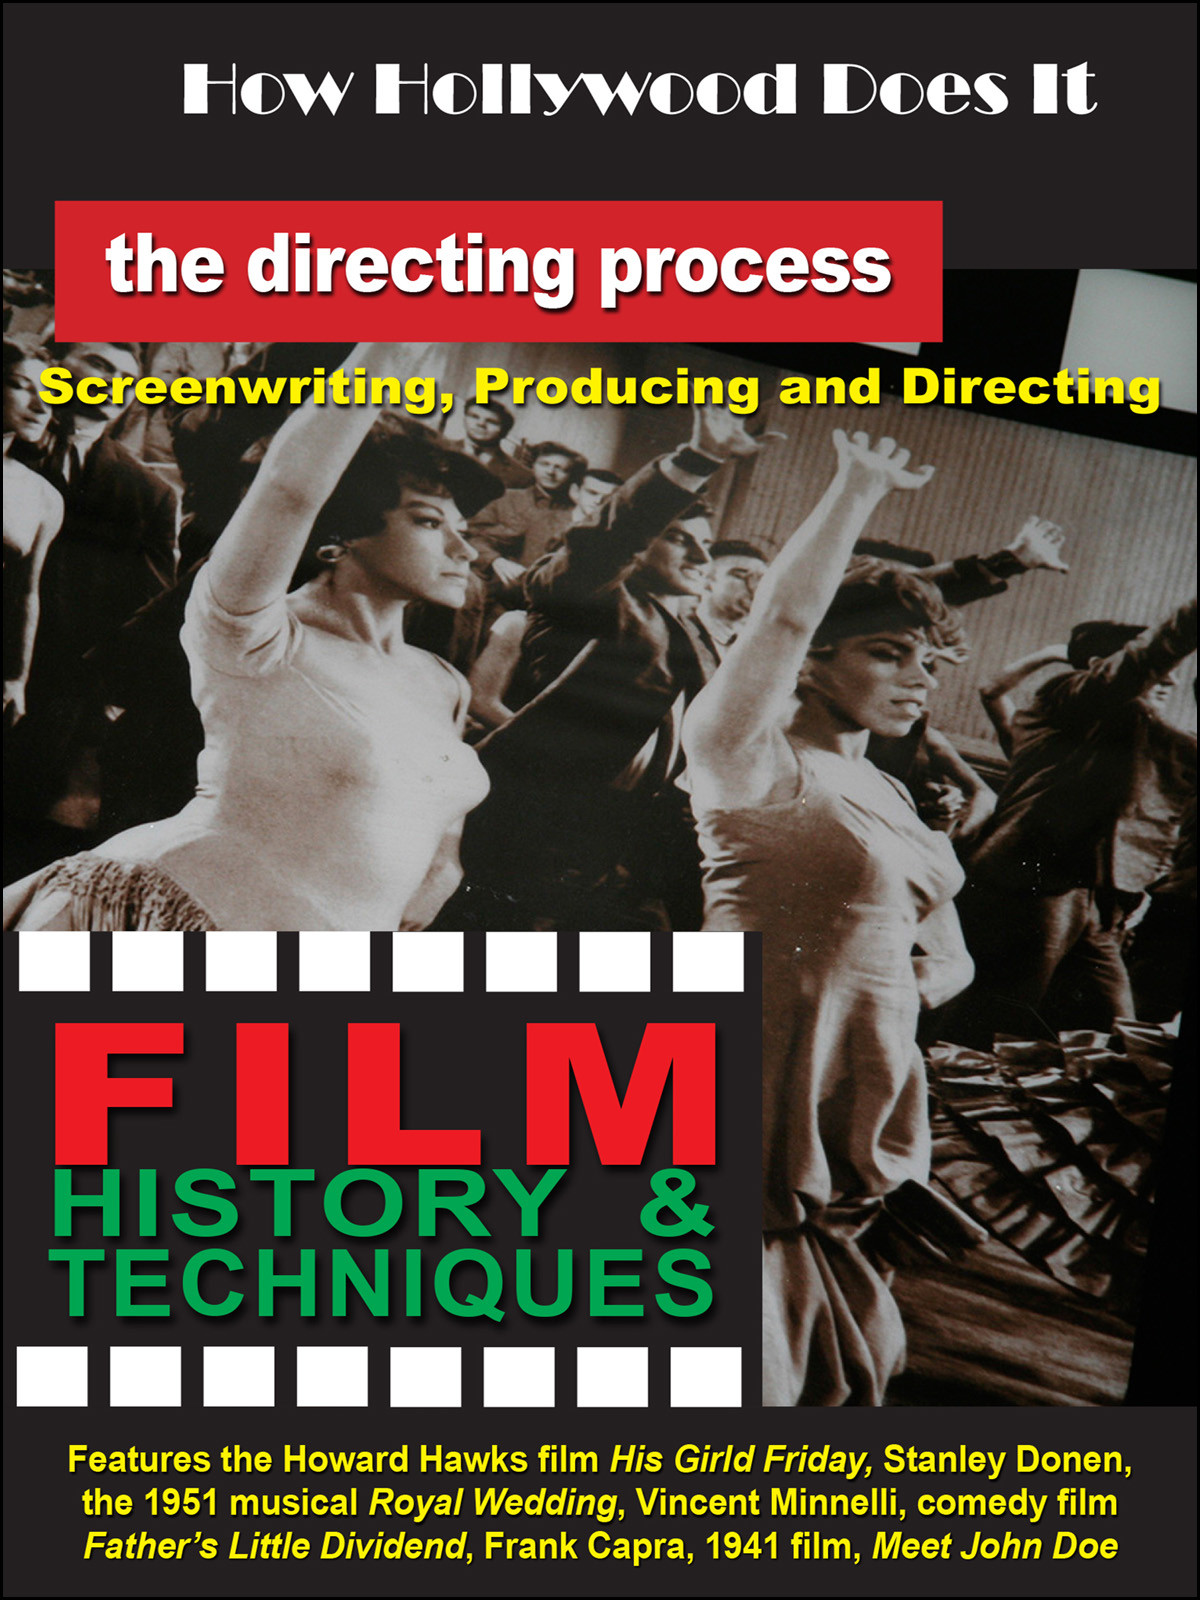 F2712 - How Hollywood Does It - Film History & Techniques of The Directing Process